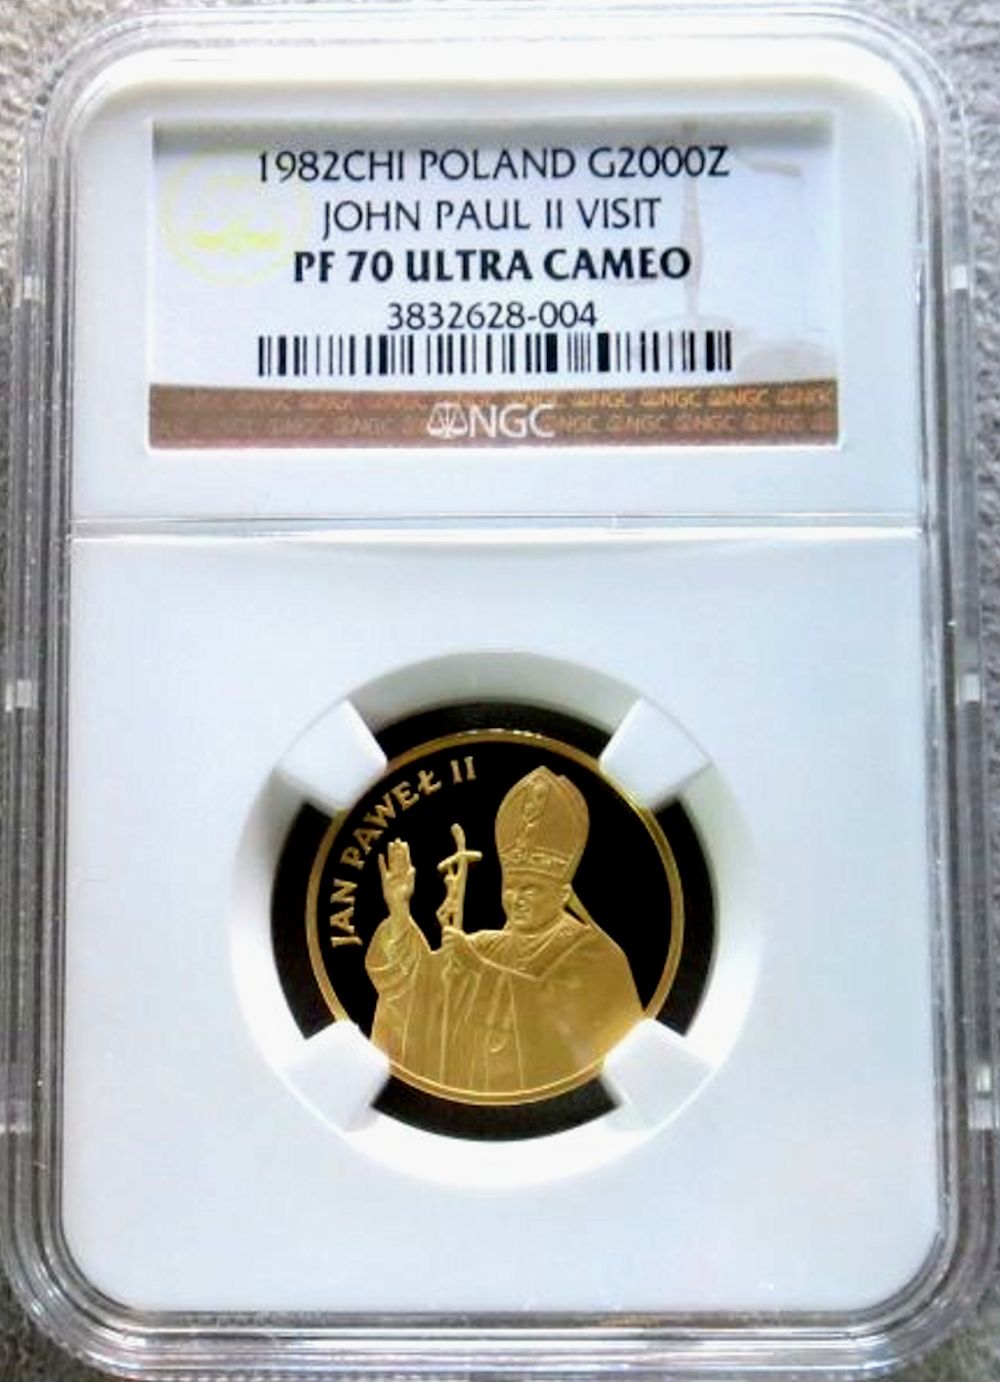 1982 GOLD POLAND 2000 ZLOTYCH NGC PERFECT PROOF 70 ULTRA CAMEO "SAINT JOHN PAUL II" ONLY 1,250 MINTED 